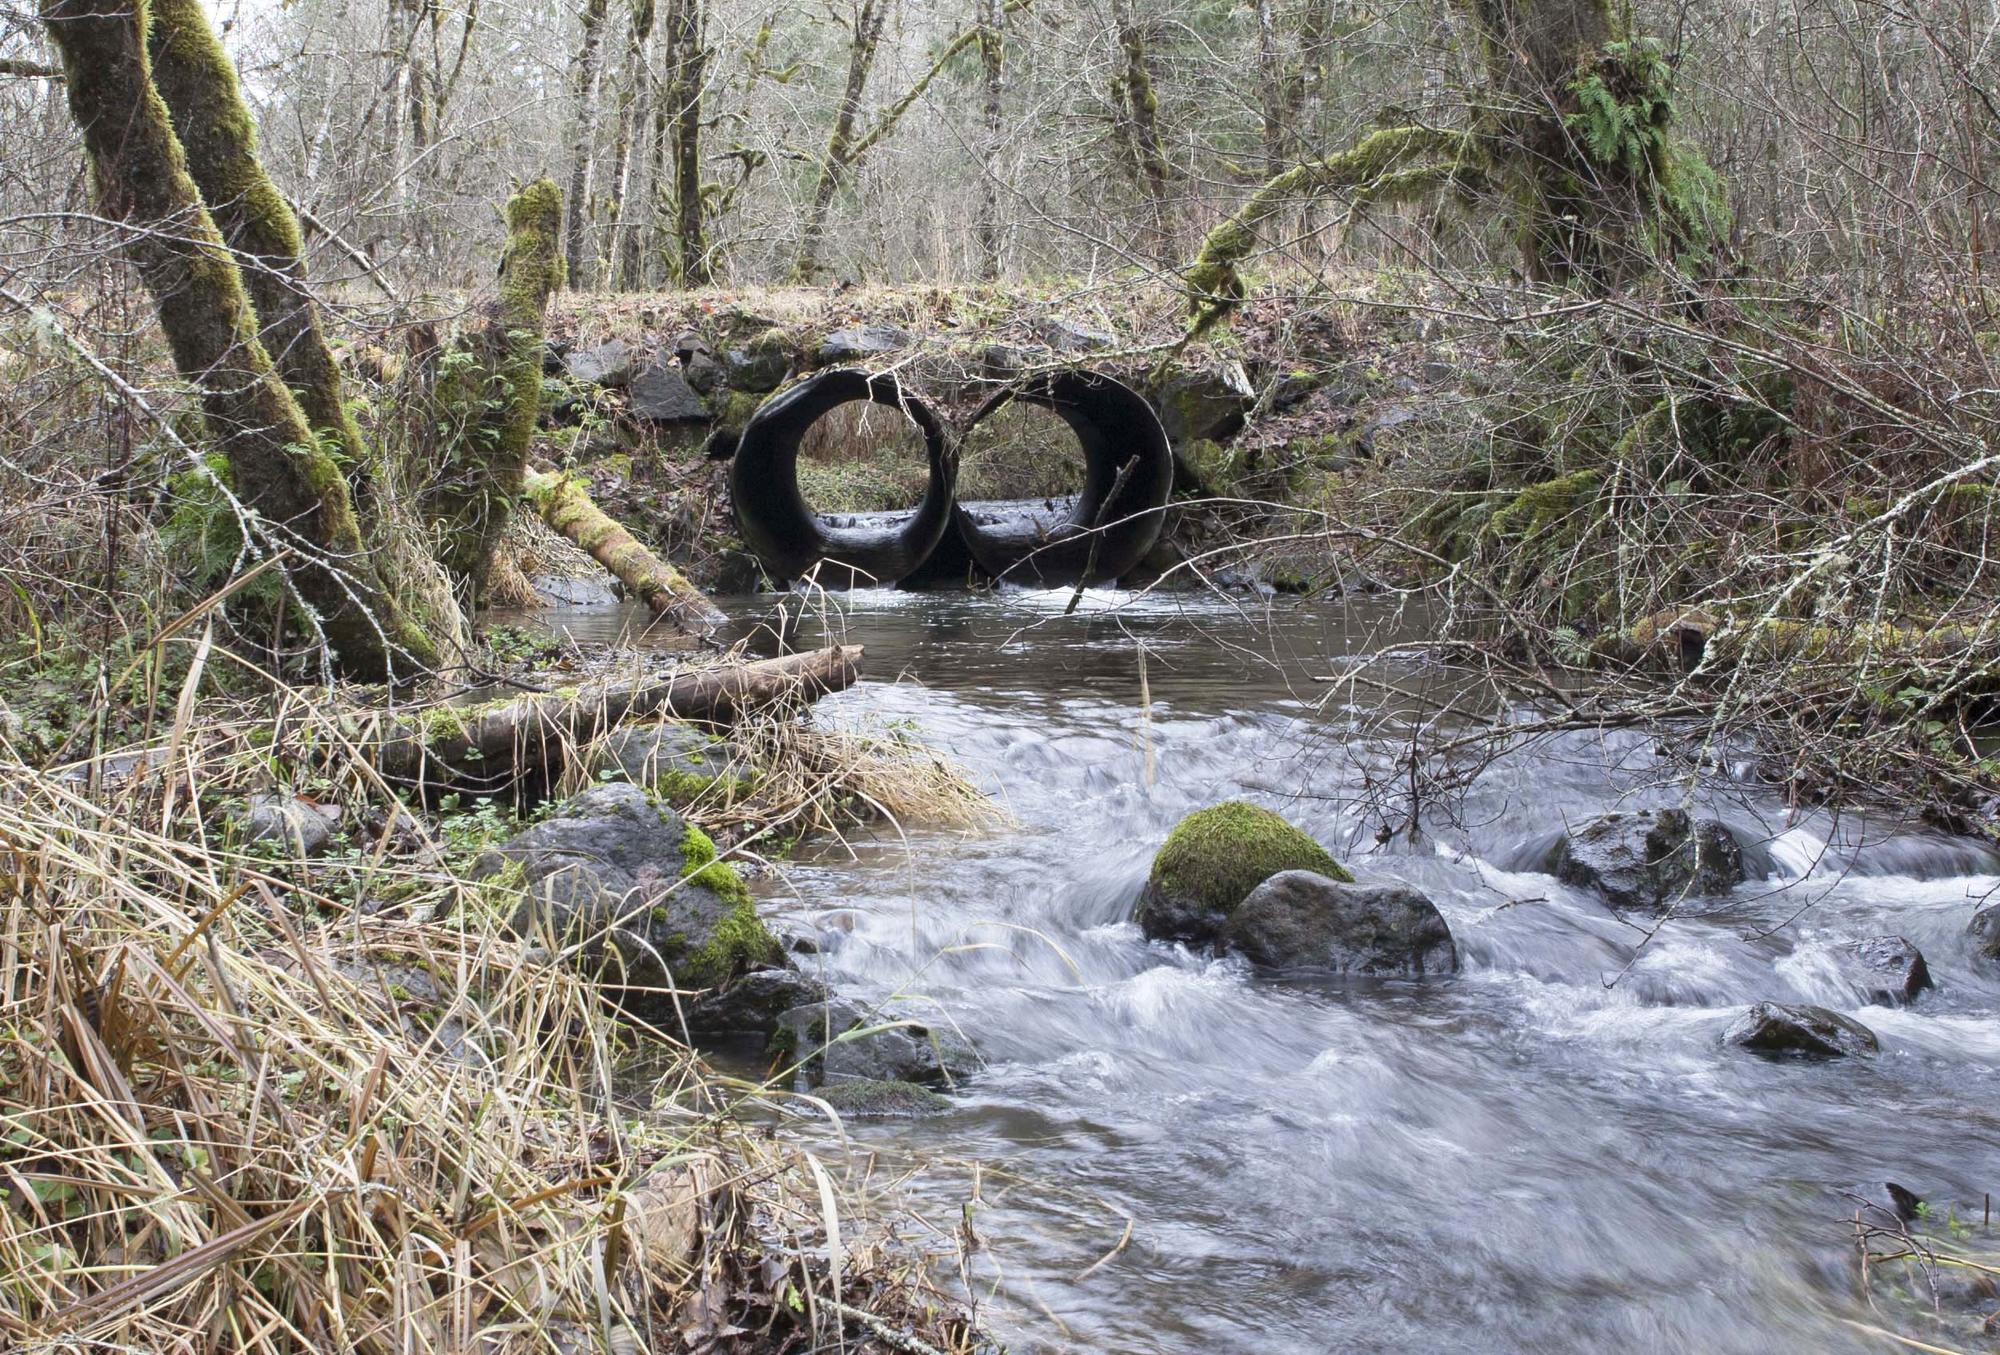 Creek with two culverts in place to allow water flow.